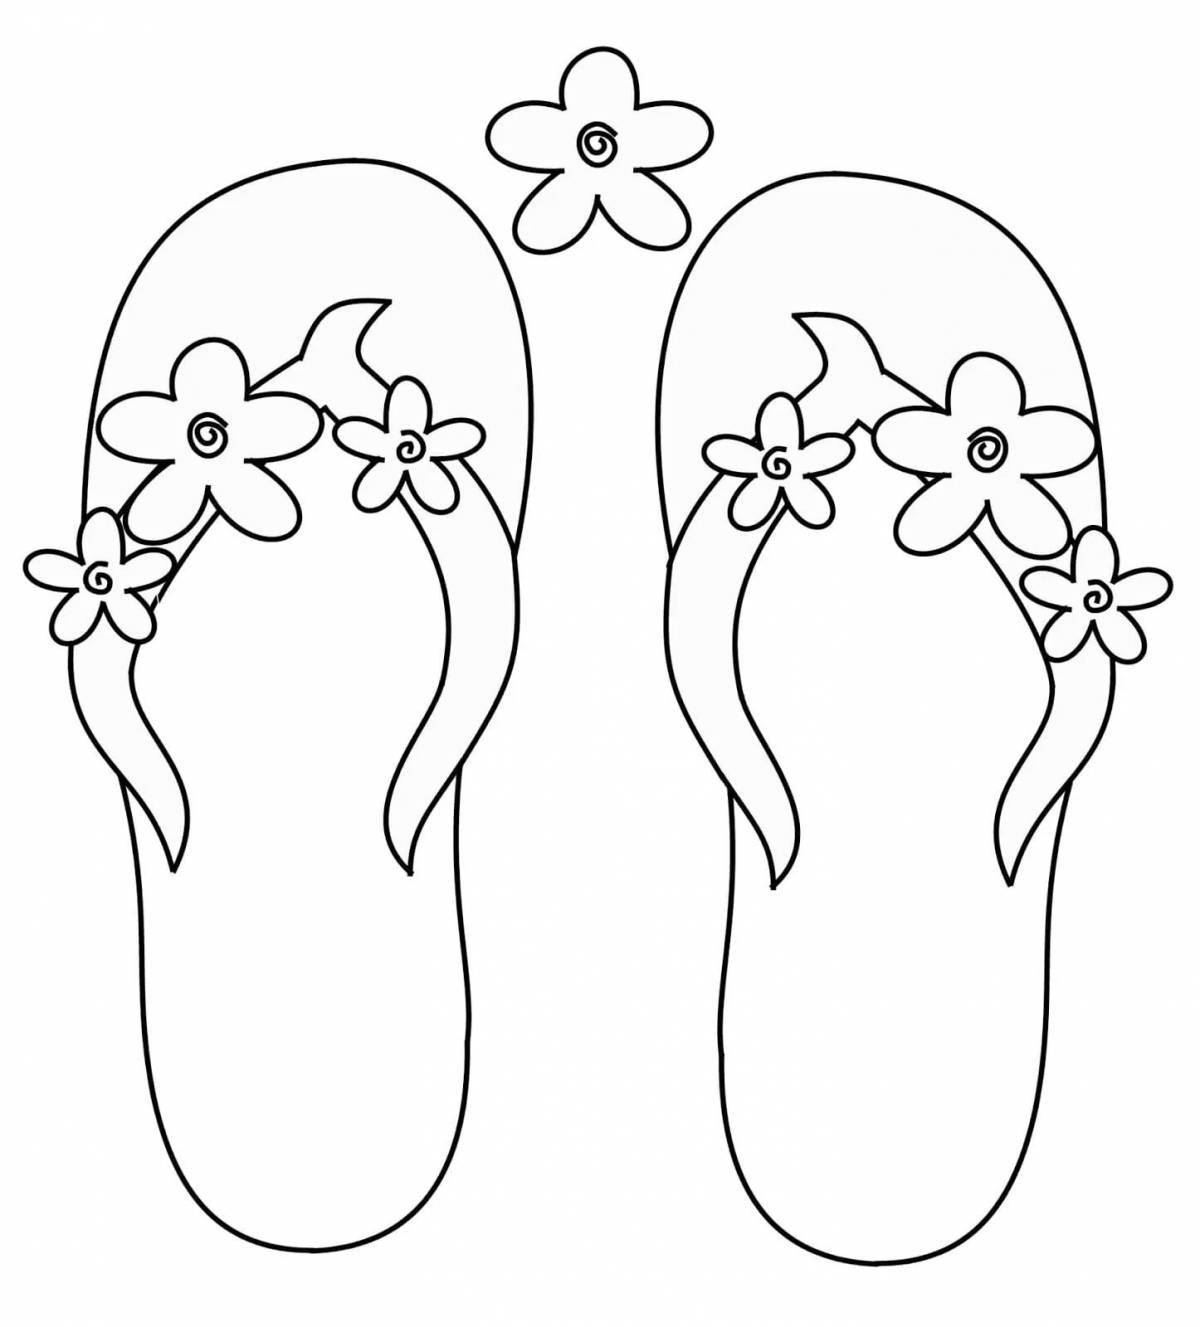 Coloring page adorable slippers